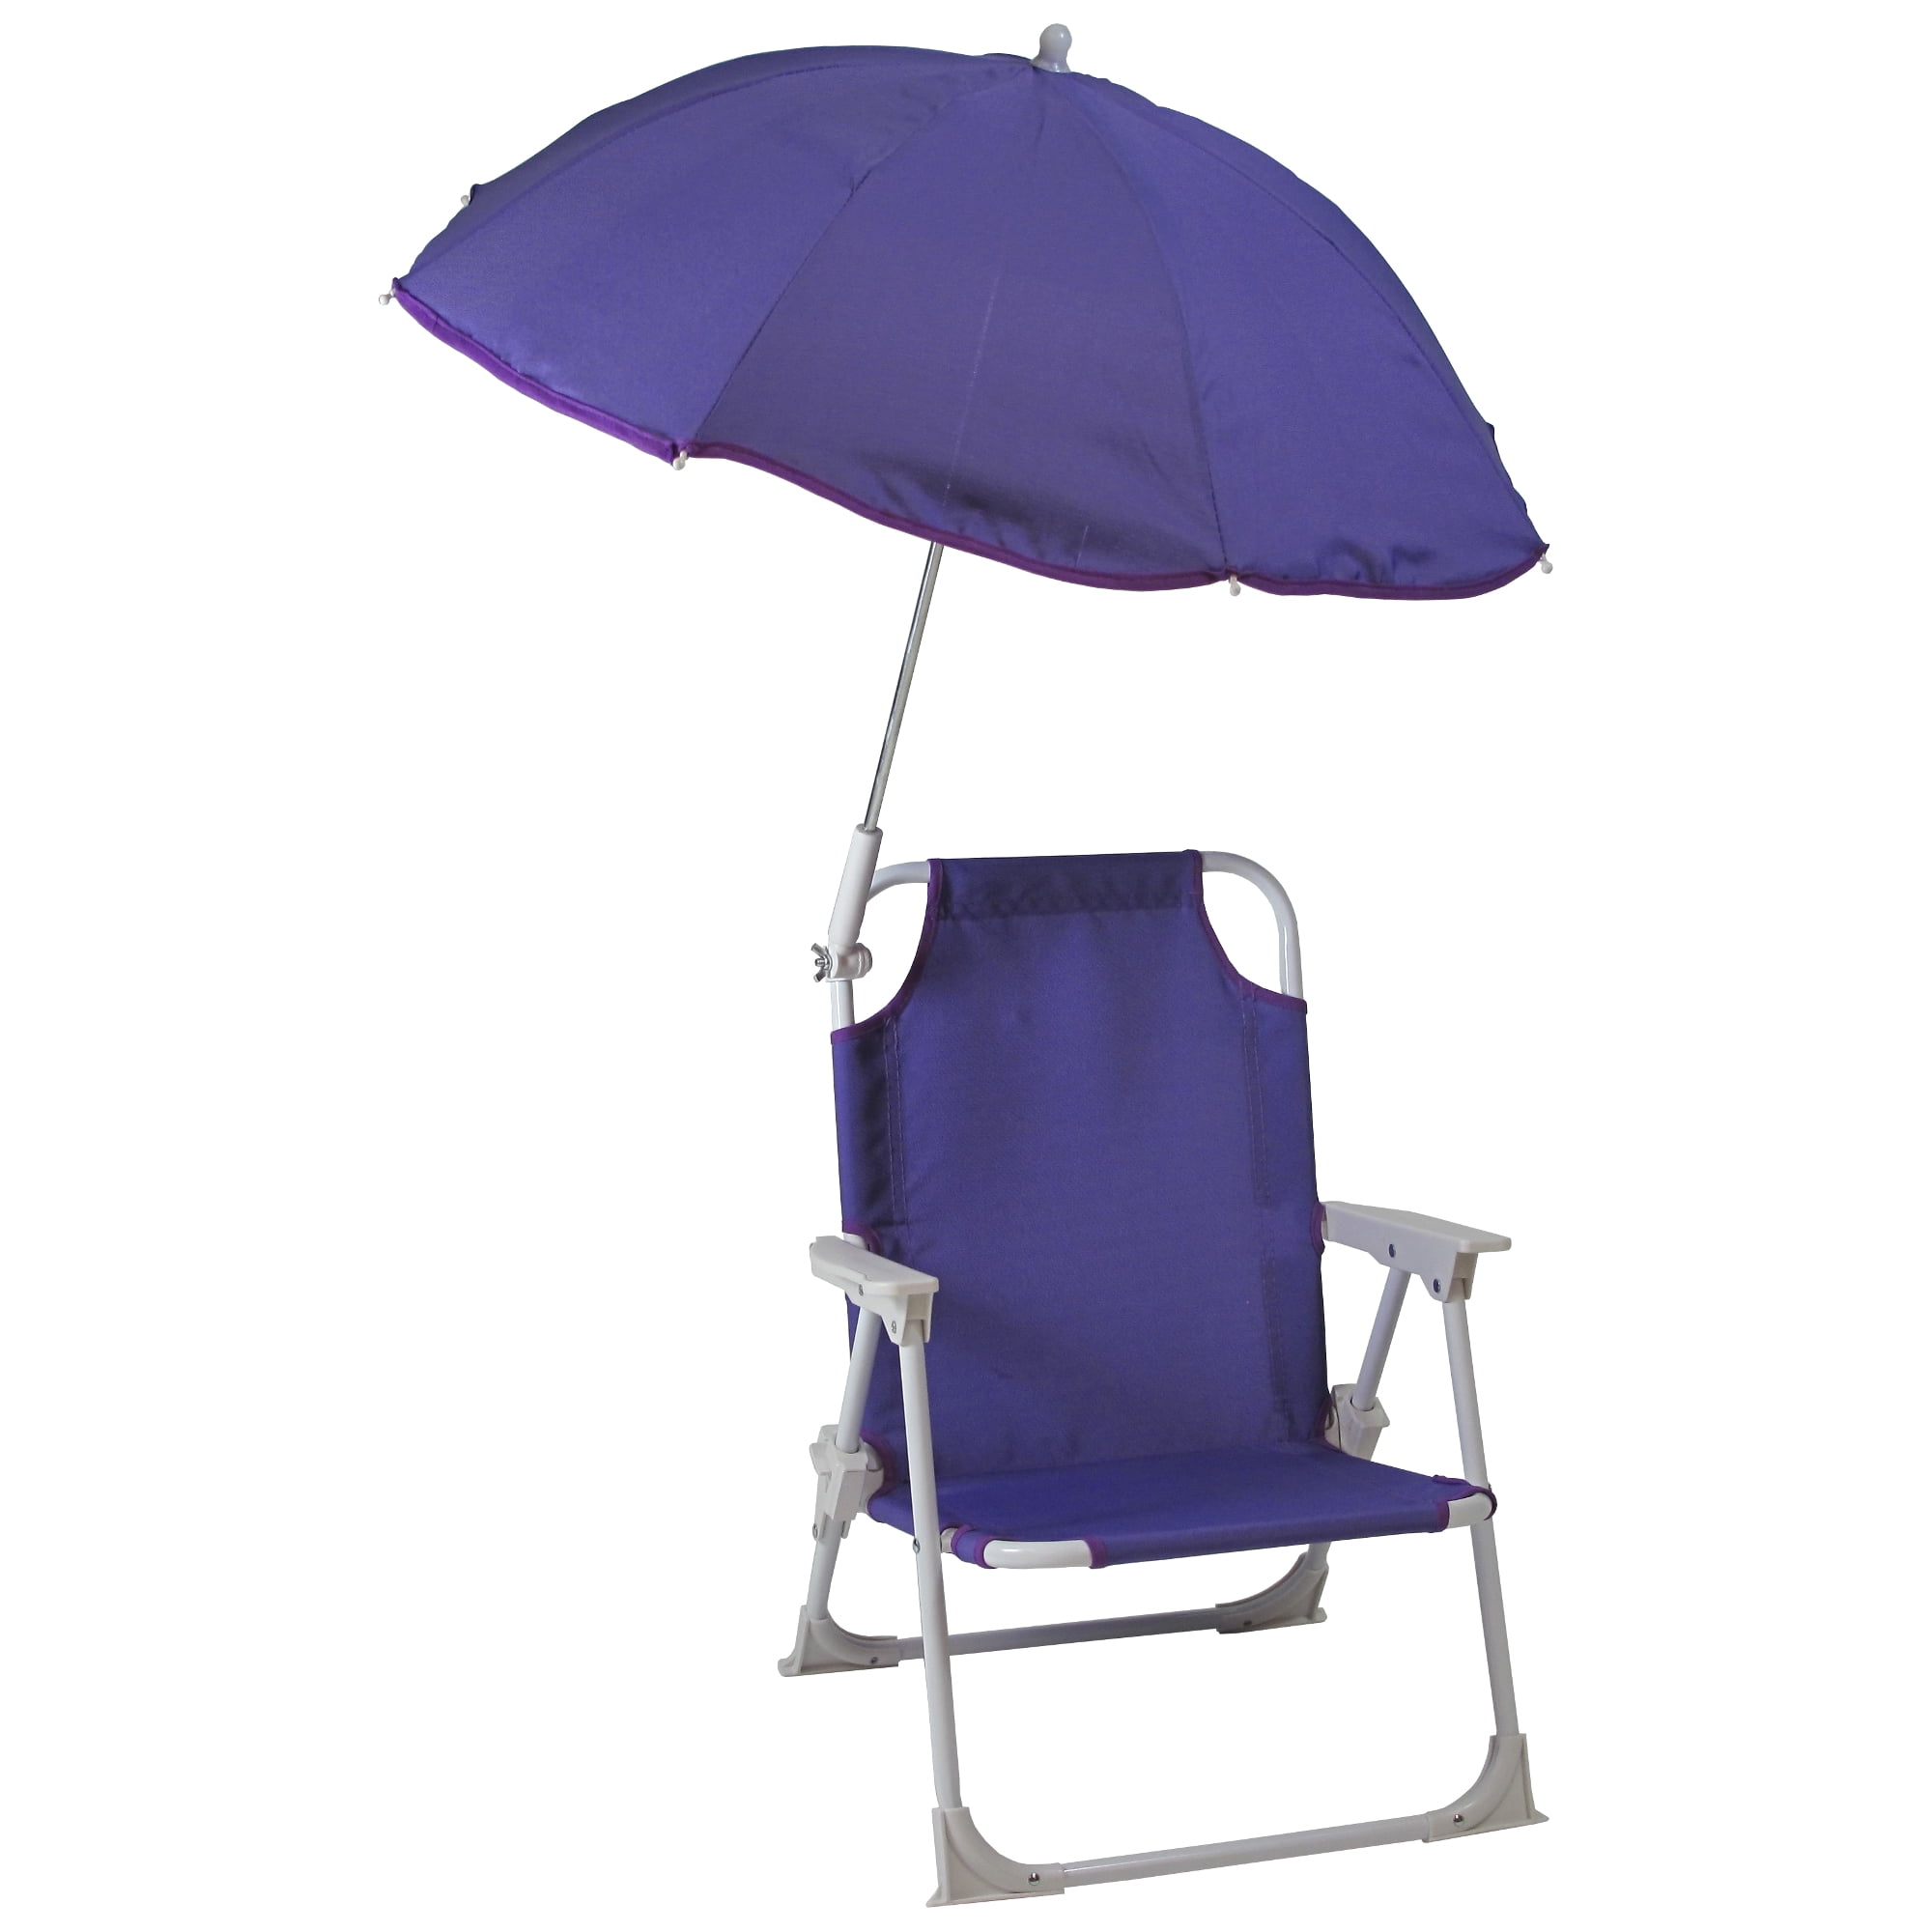 Simple Beach Chair With Umbrella Attached Target for Large Space